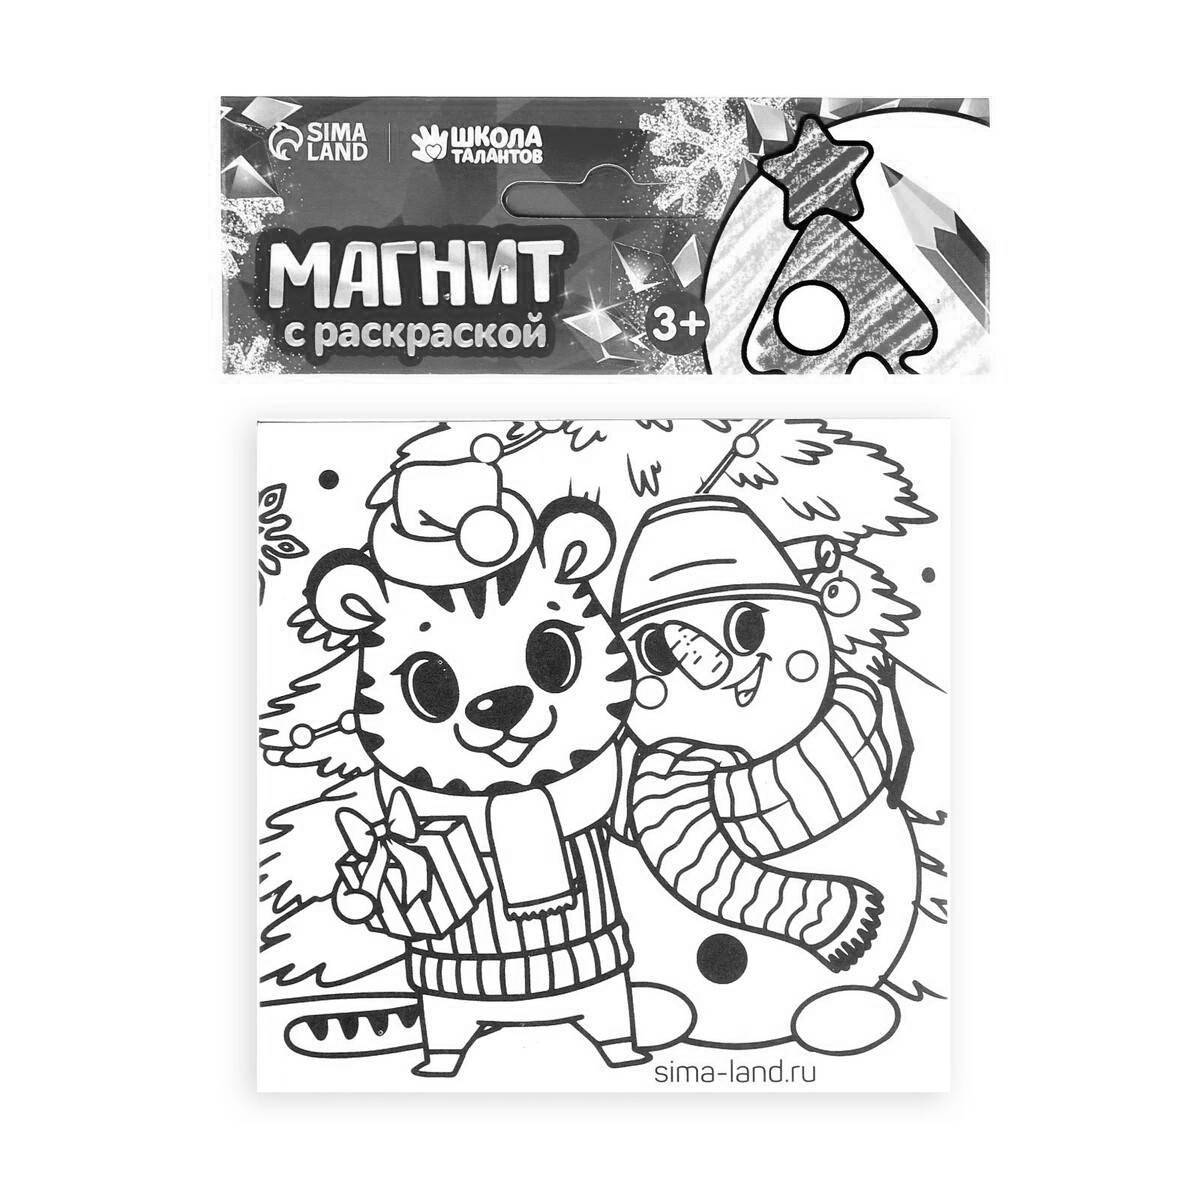 Playful magnet coloring page for kids